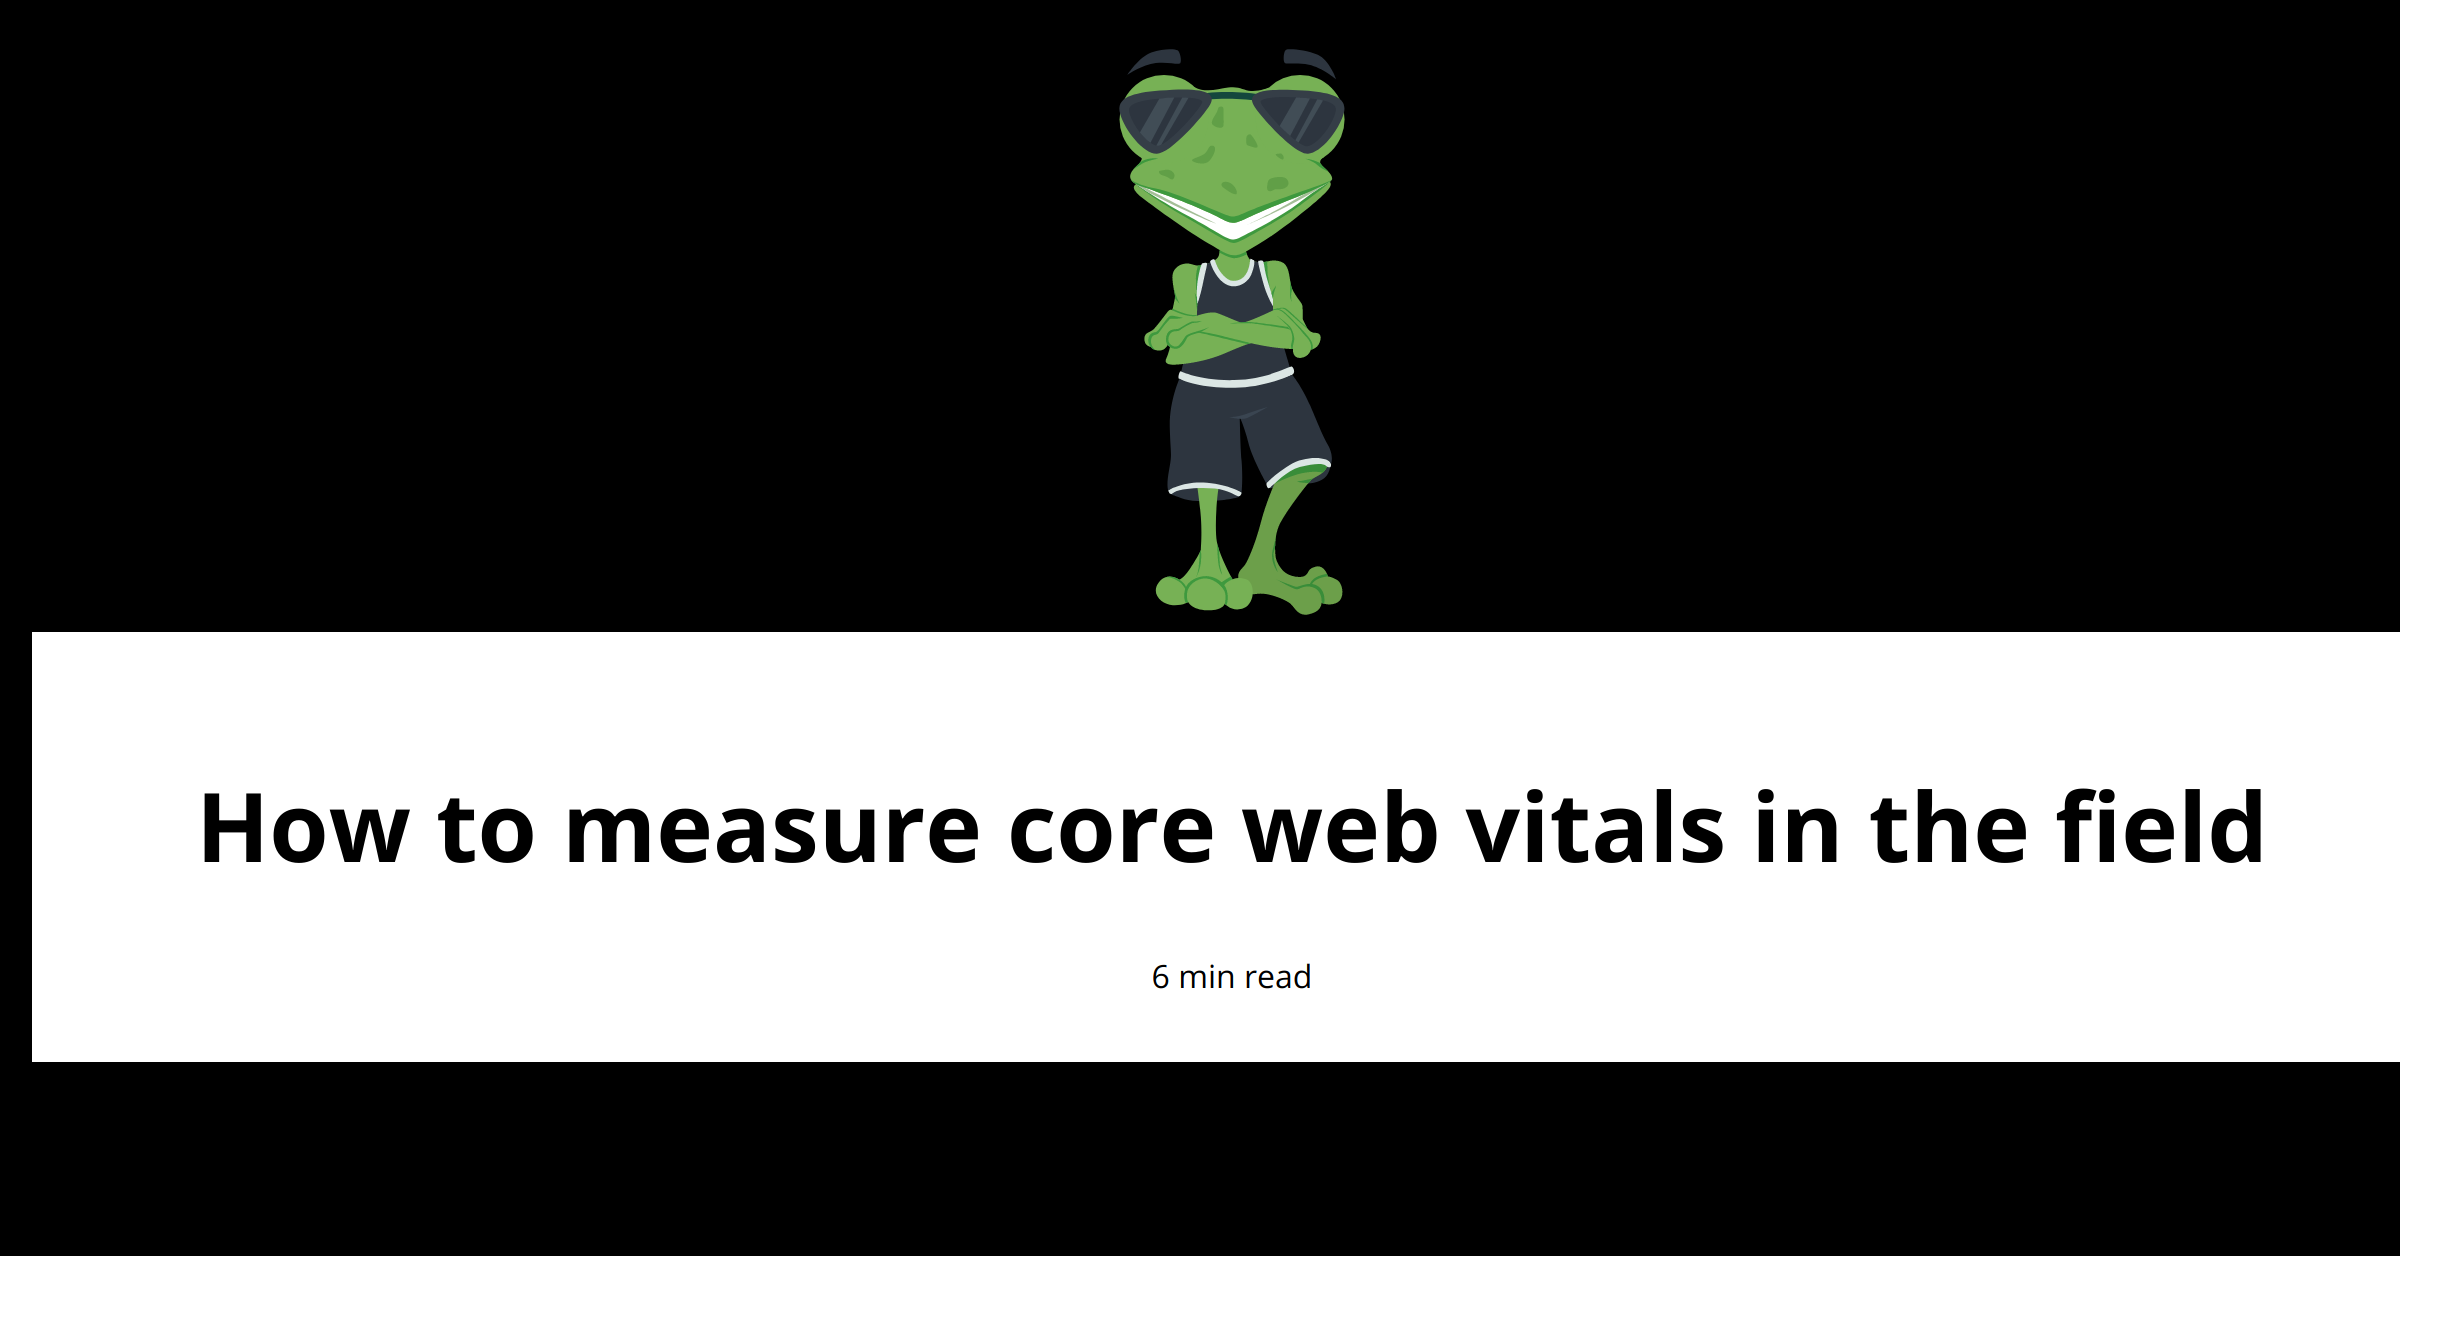 How to measure core web vitals in the field